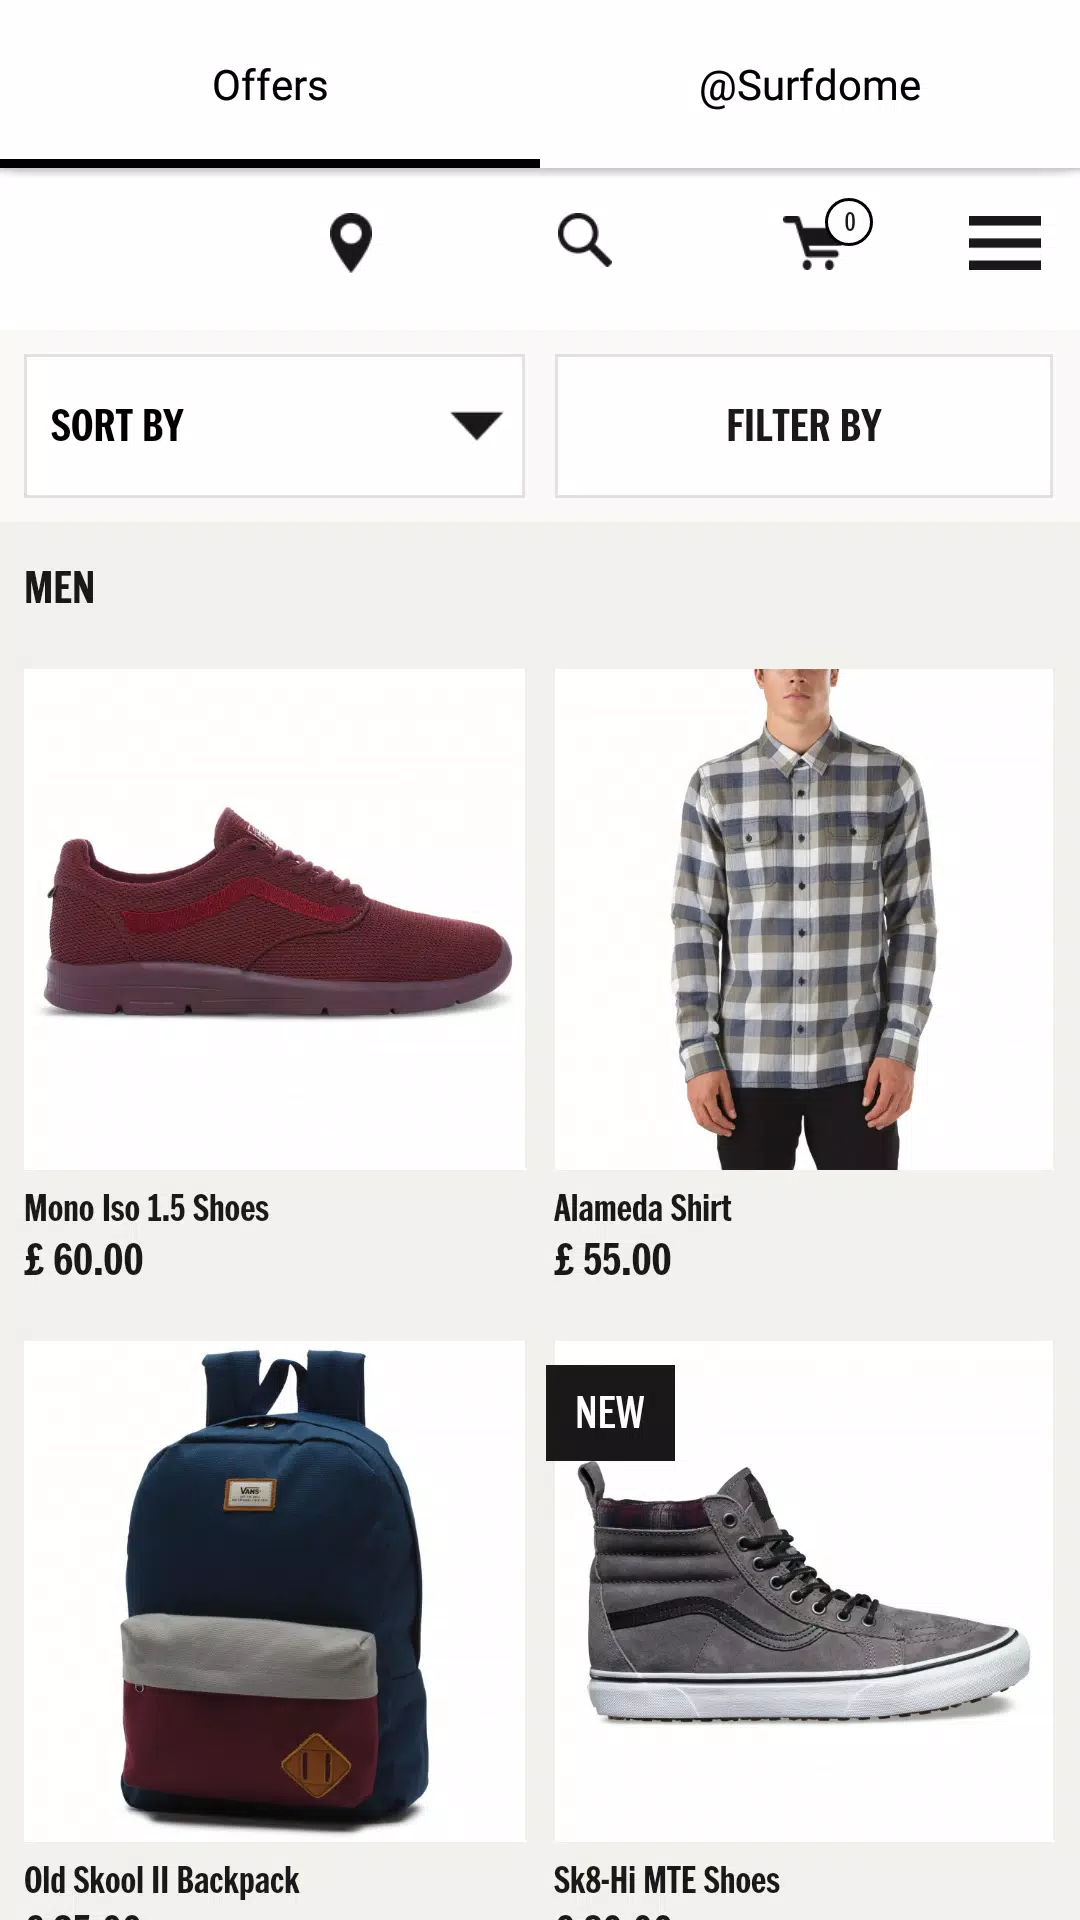 Offers for Vans Shoes for Android - APK Download